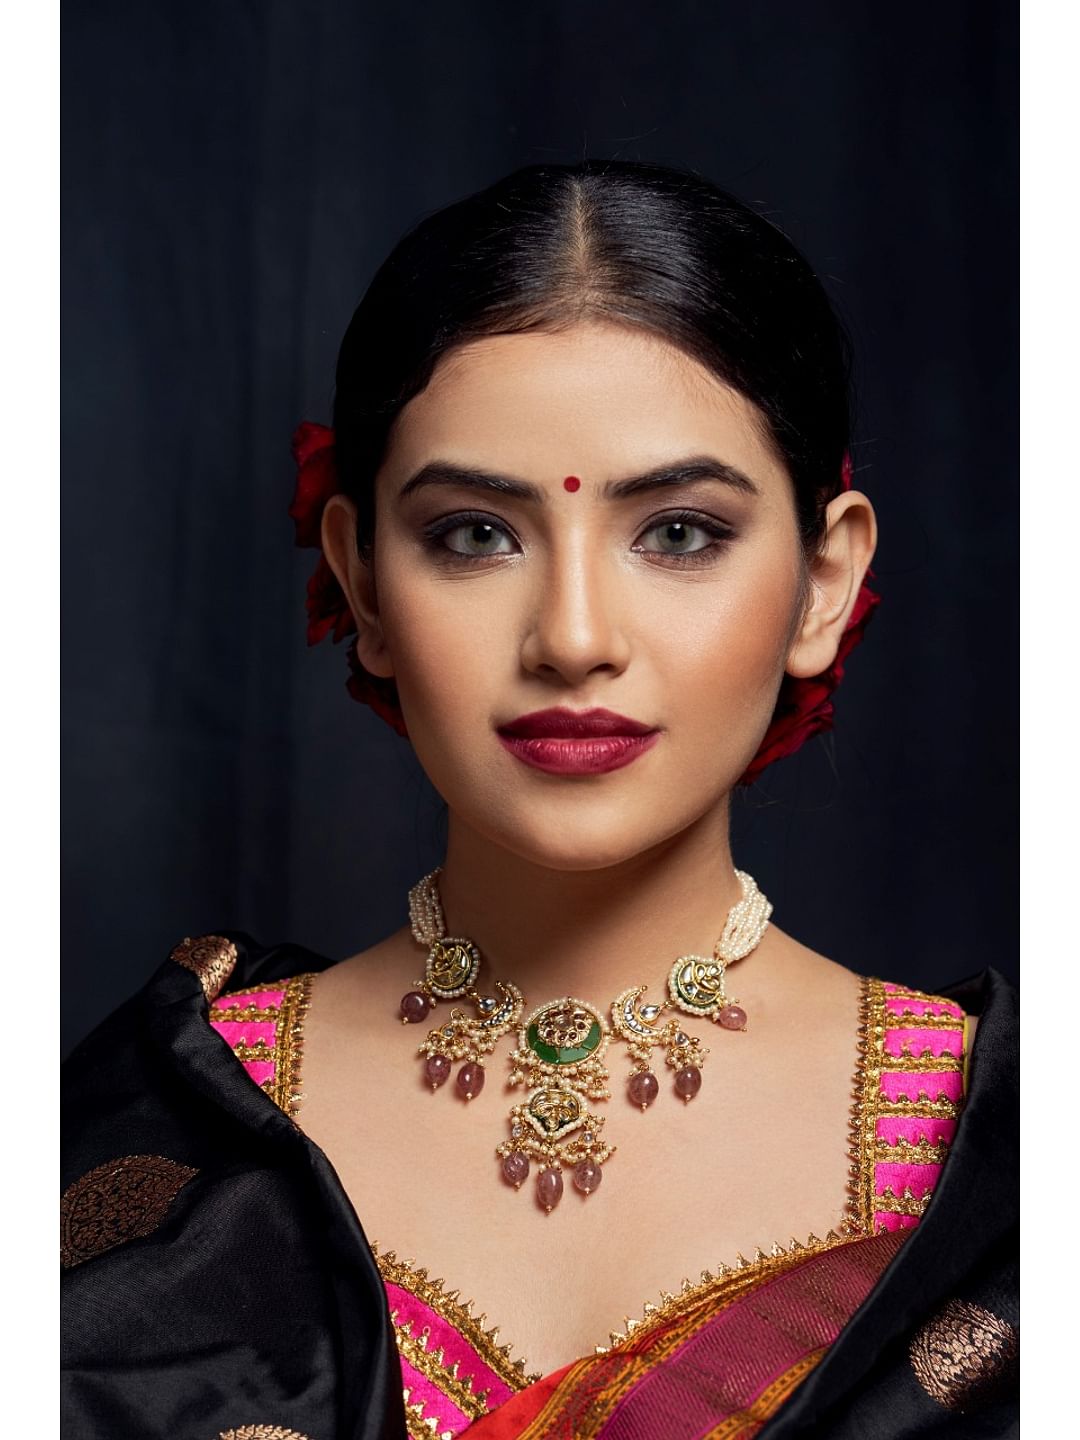 Buy Green Centre Pale Pink Drops Choker Necklace for Women Online at Ajnaa |452516